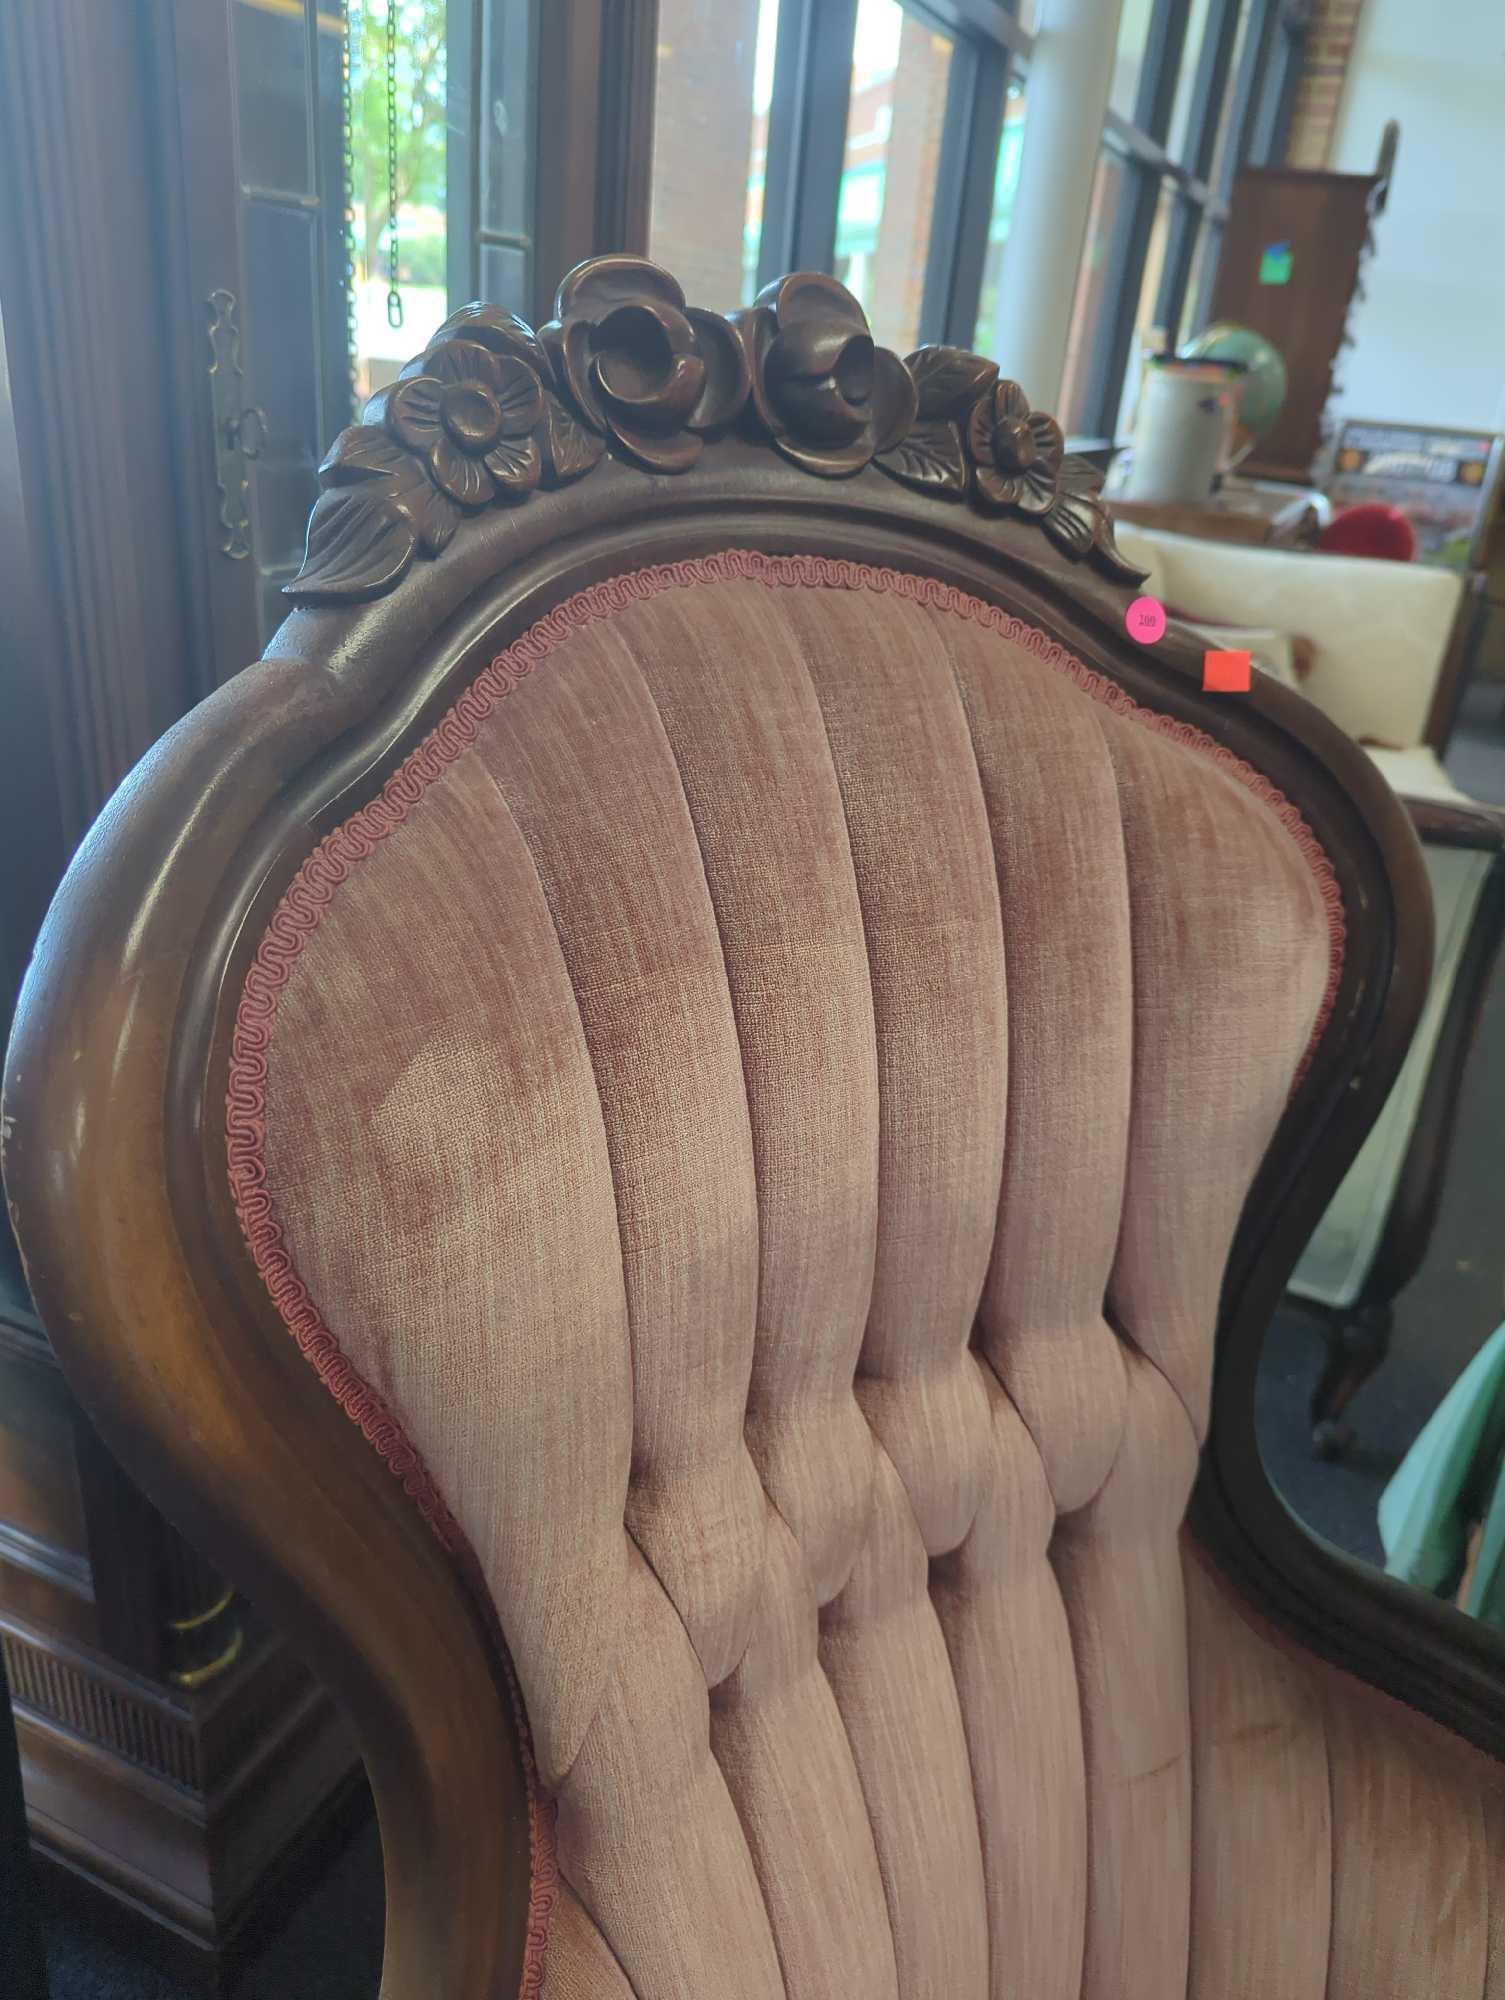 Hers Vintage Victorian style carved parlor chairs, With a Button Tufted Back, Measure Approximately